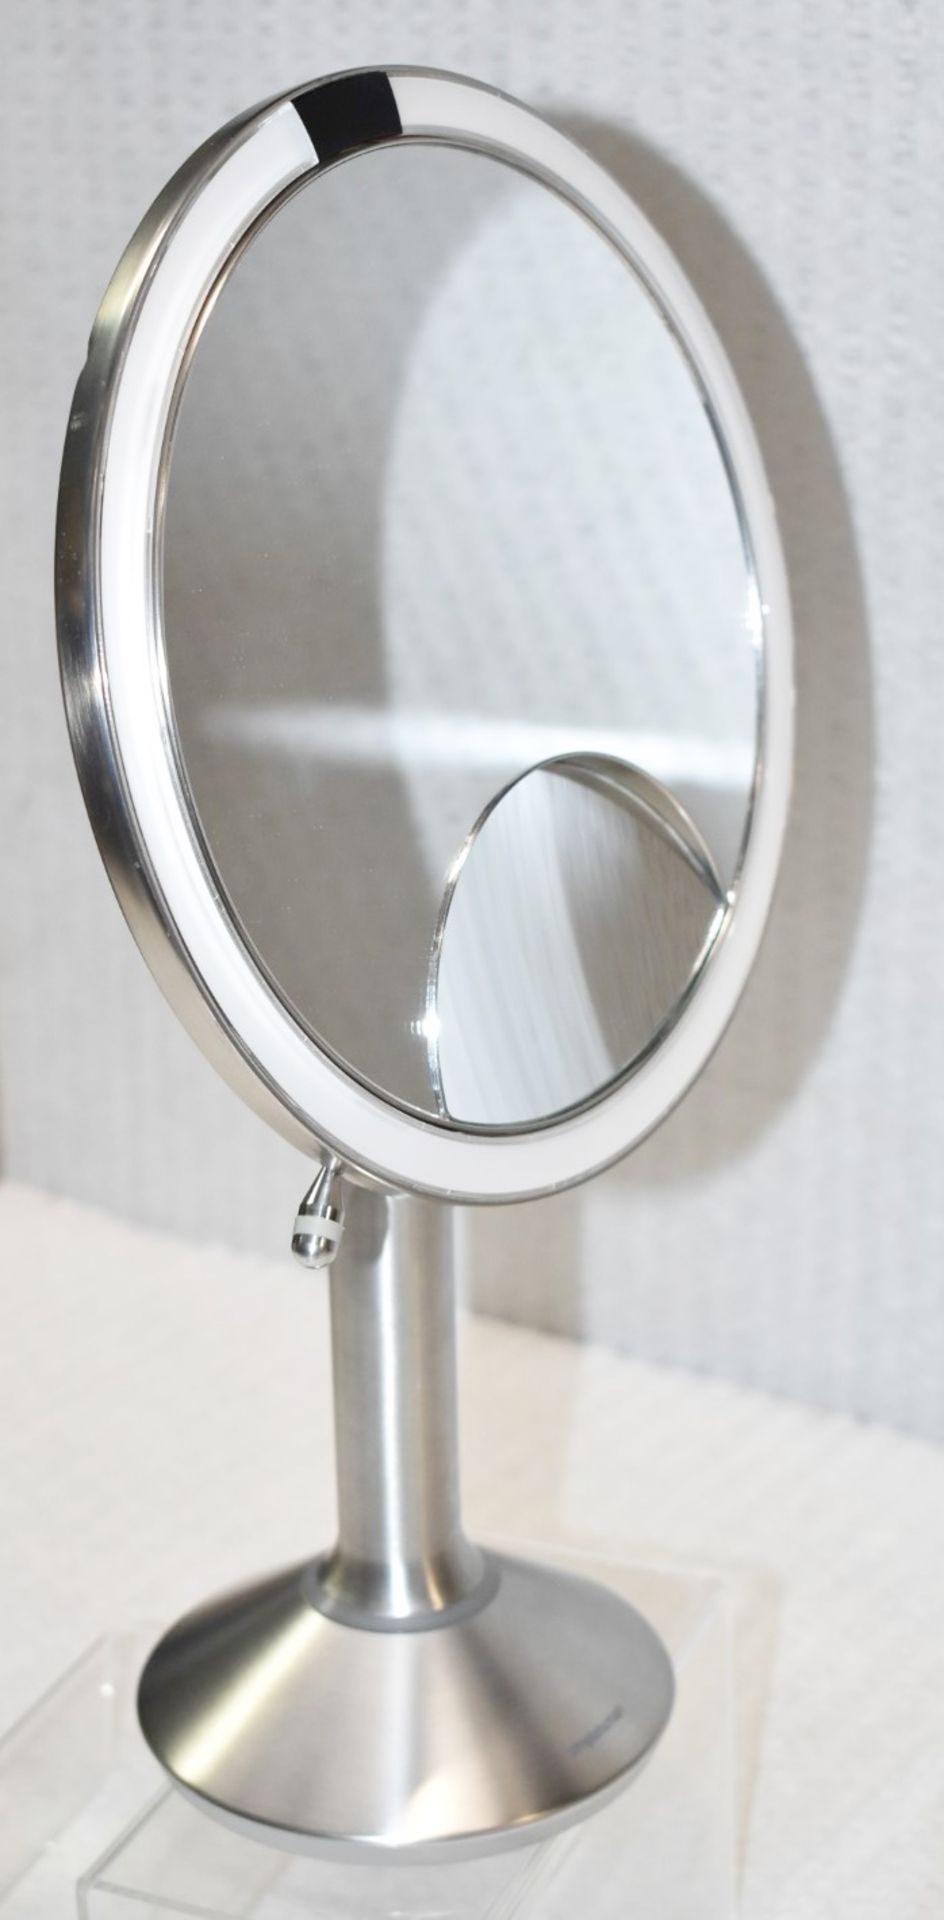 1 x SIMPLEHUMAN Stainless Steel Trio Touch Control Mirror - Original Price £289.95 - Image 7 of 7